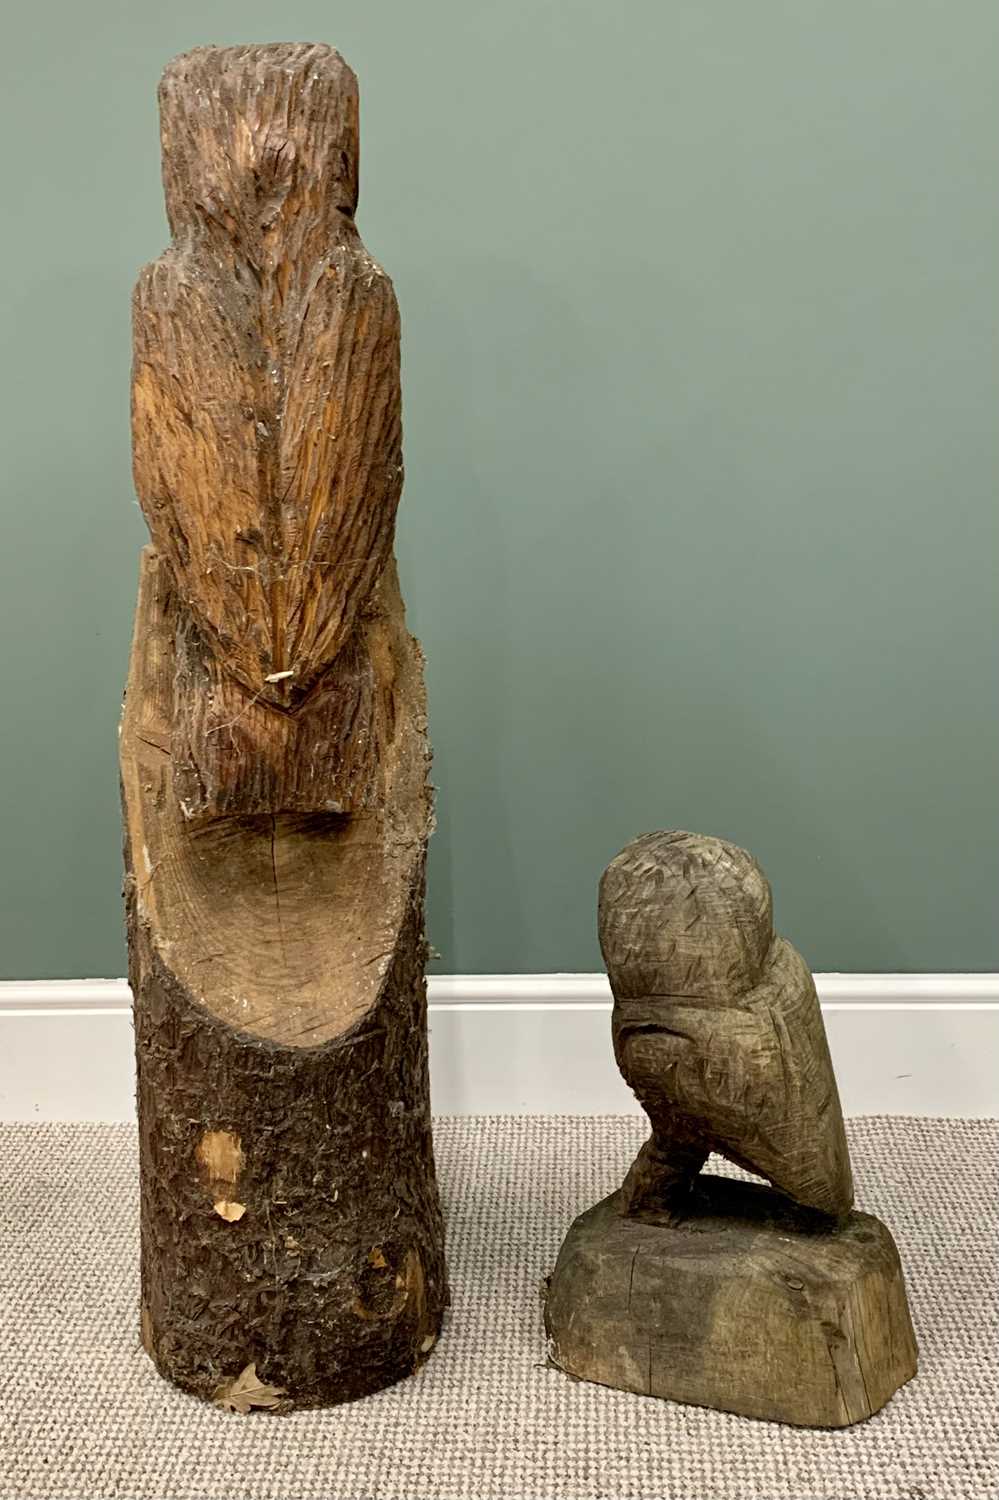 TWO CARVED WOODEN OWL GARDEN ORNAMENTS - one seated on a natural trunk, 110cms H, the other fully - Image 4 of 4